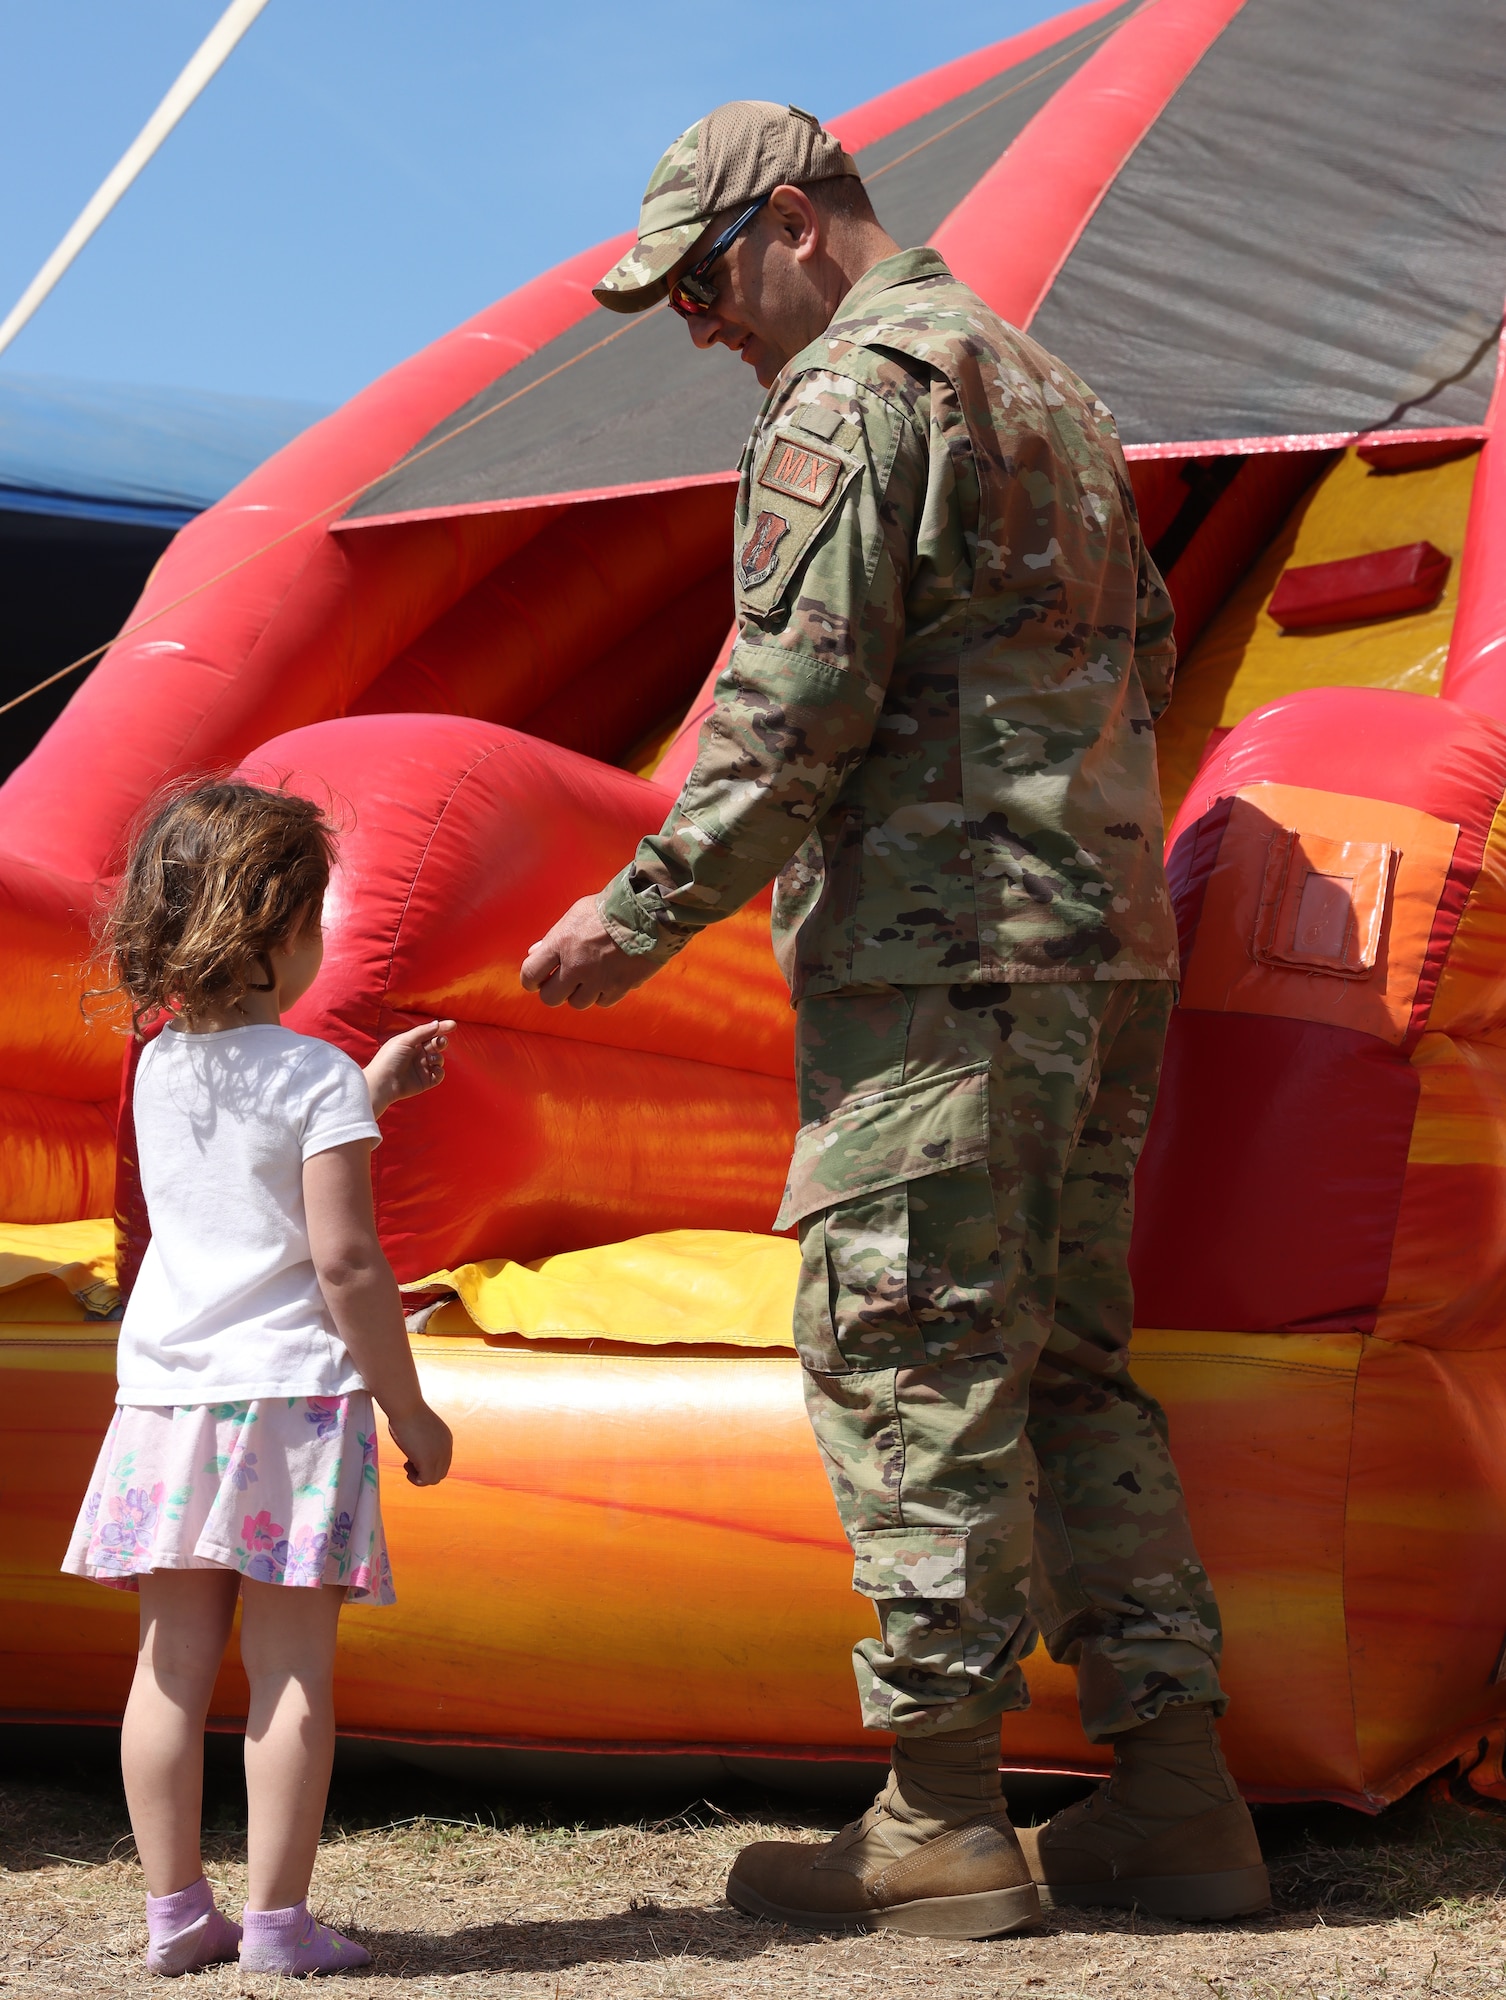 A U.S. Air Force member from the 104th Fighter Wing spends time with his daughter during the 2023 Westfield International Air Show, May 12, 2023, at Barnes Air National Guard Base, Massachusetts. Air shows are a public event held on base to provide an opportunity for people to see U.S. military air capabilities in action and meet the service members who fly and maintain the equipment. (Courtesy photo by Aedan Nault-Goodreau)